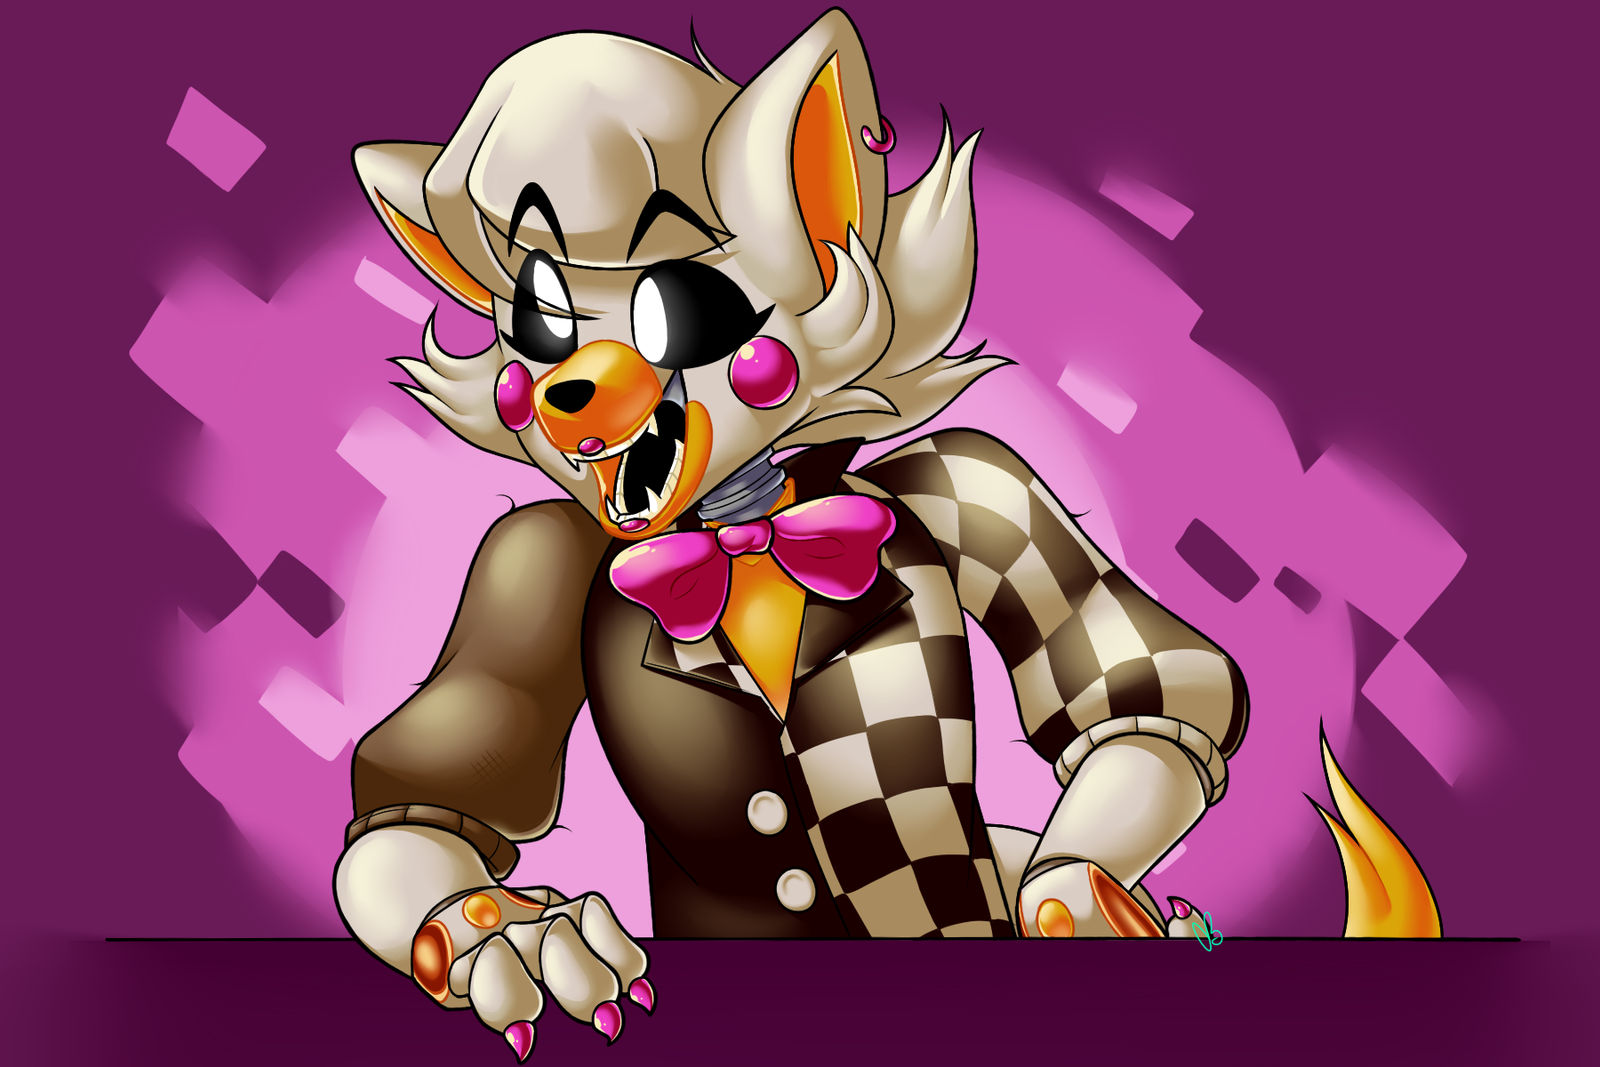 Picklez 🐊 on X: Clickteam's Lolbit tho!! such a cool design